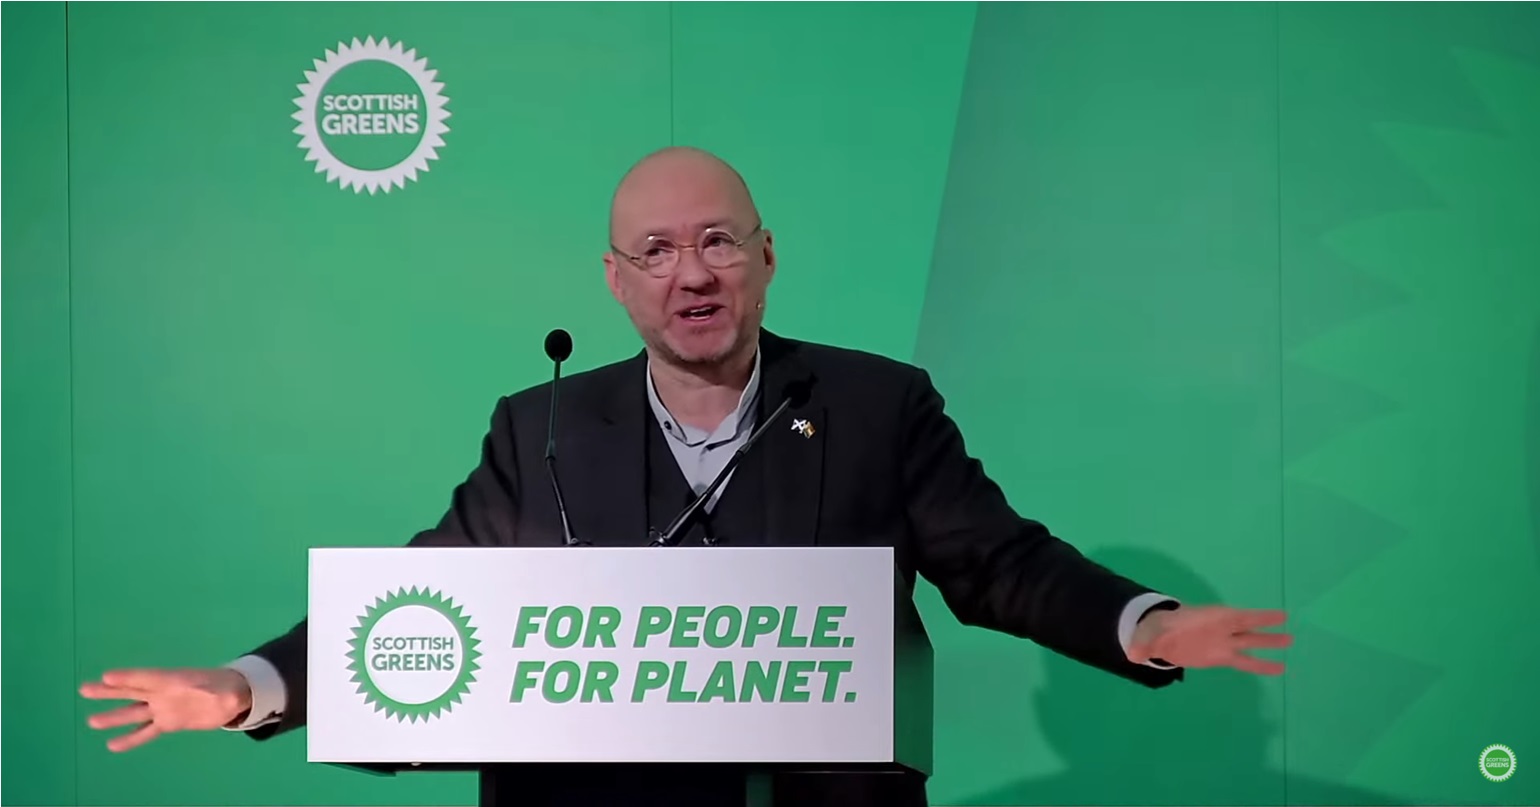 Patrick Harvie speaking at the Scottish Green Party conference